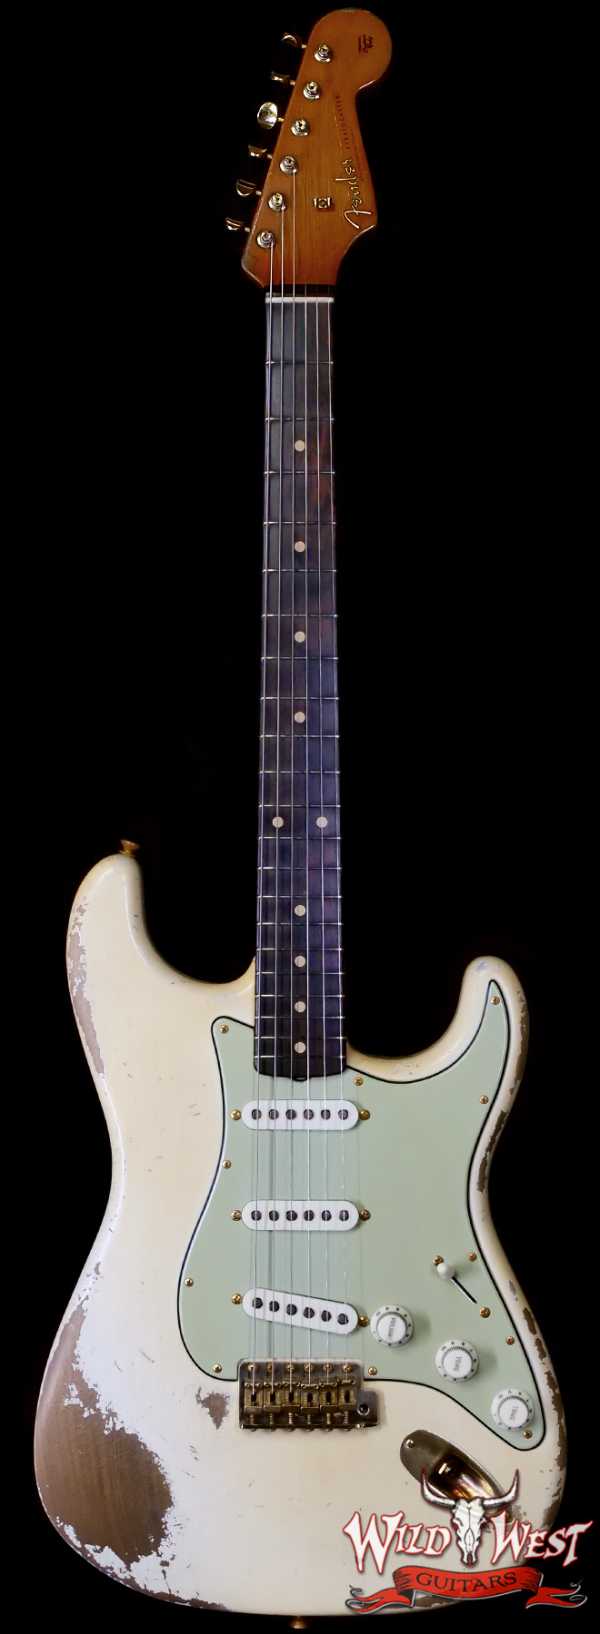 Fender Custom Shop Dale Wilson Masterbuilt 1961 Stratocaster Hand-Wound Pickups Brazilian Rosewood Fingerboard Relic Vintage White 7.65 LBS (US Only / No International Shipping)